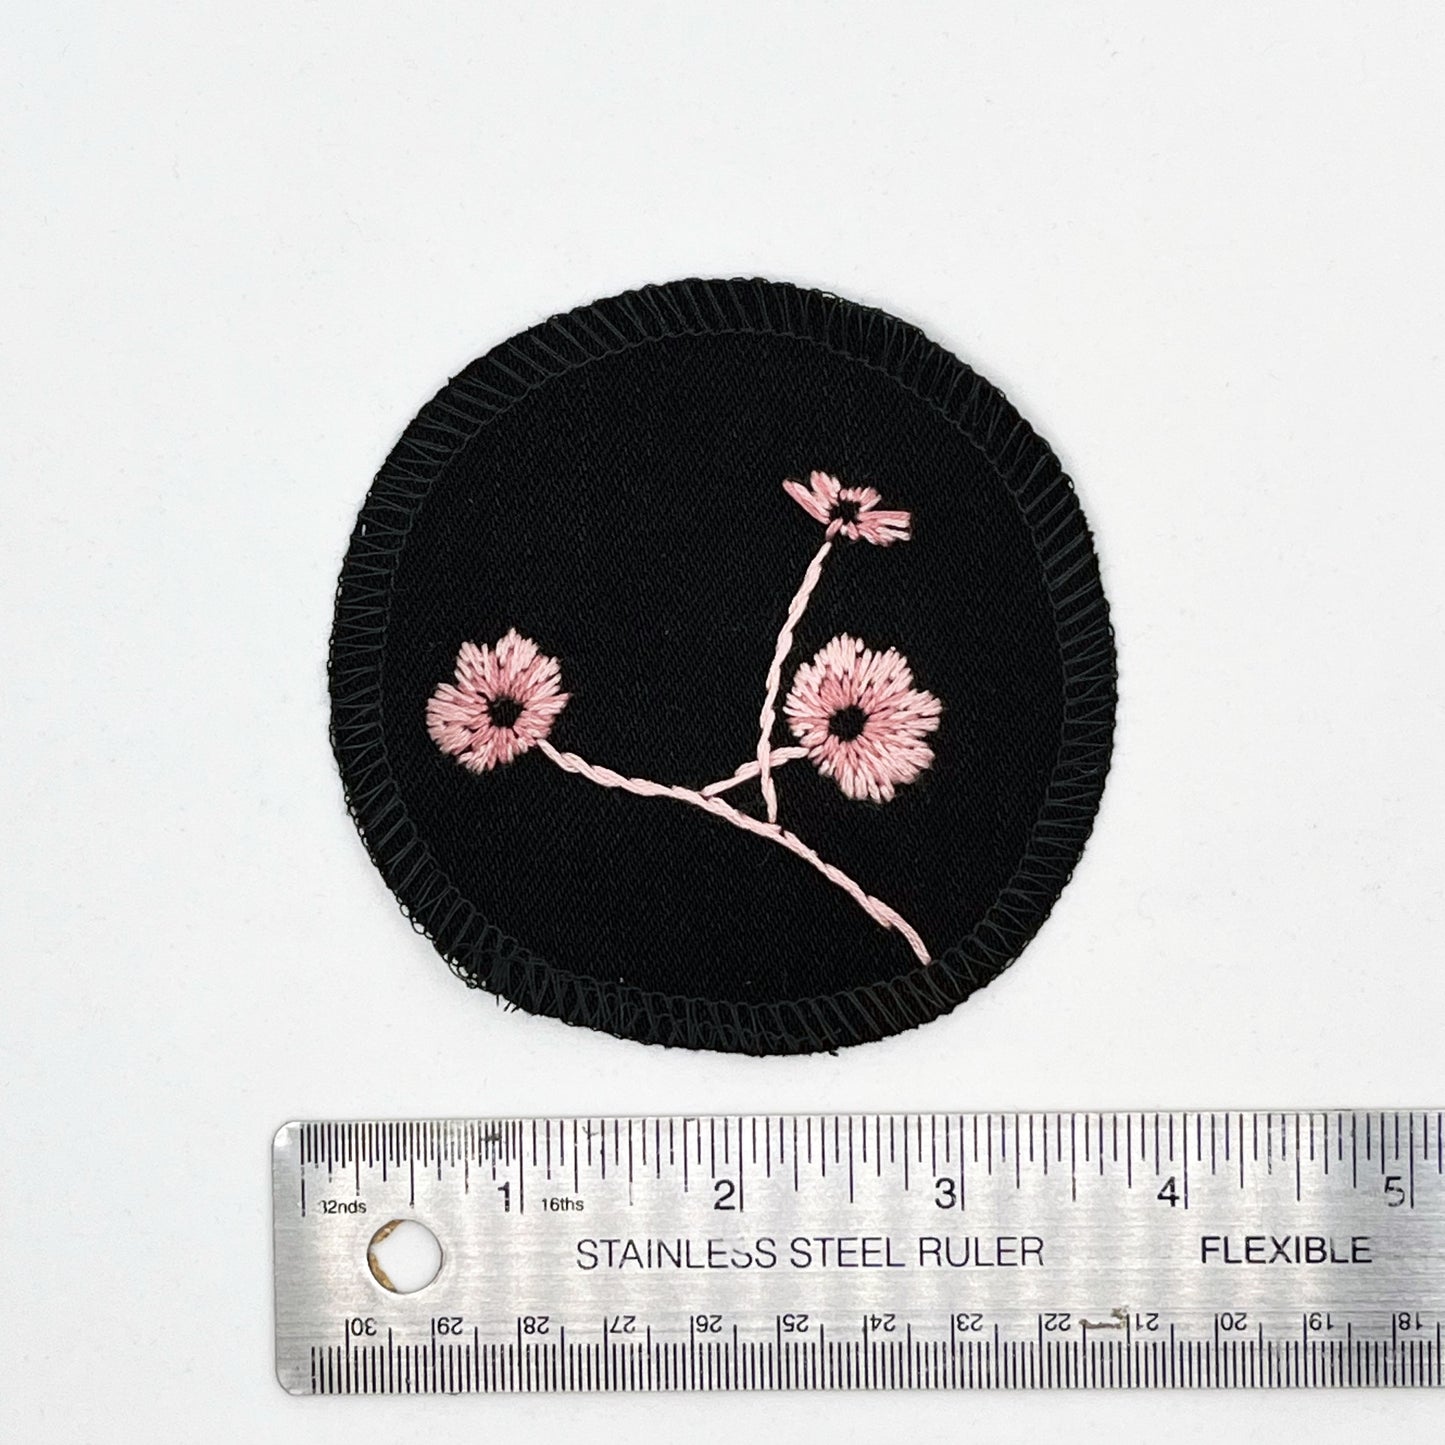 a circle shaped patch, made from black denim fabric, hand embroidered with 3 poppies in shades of pink, edges overlocked with black thread, placed next to a metal ruler to show a diameter of four inches, on a white background